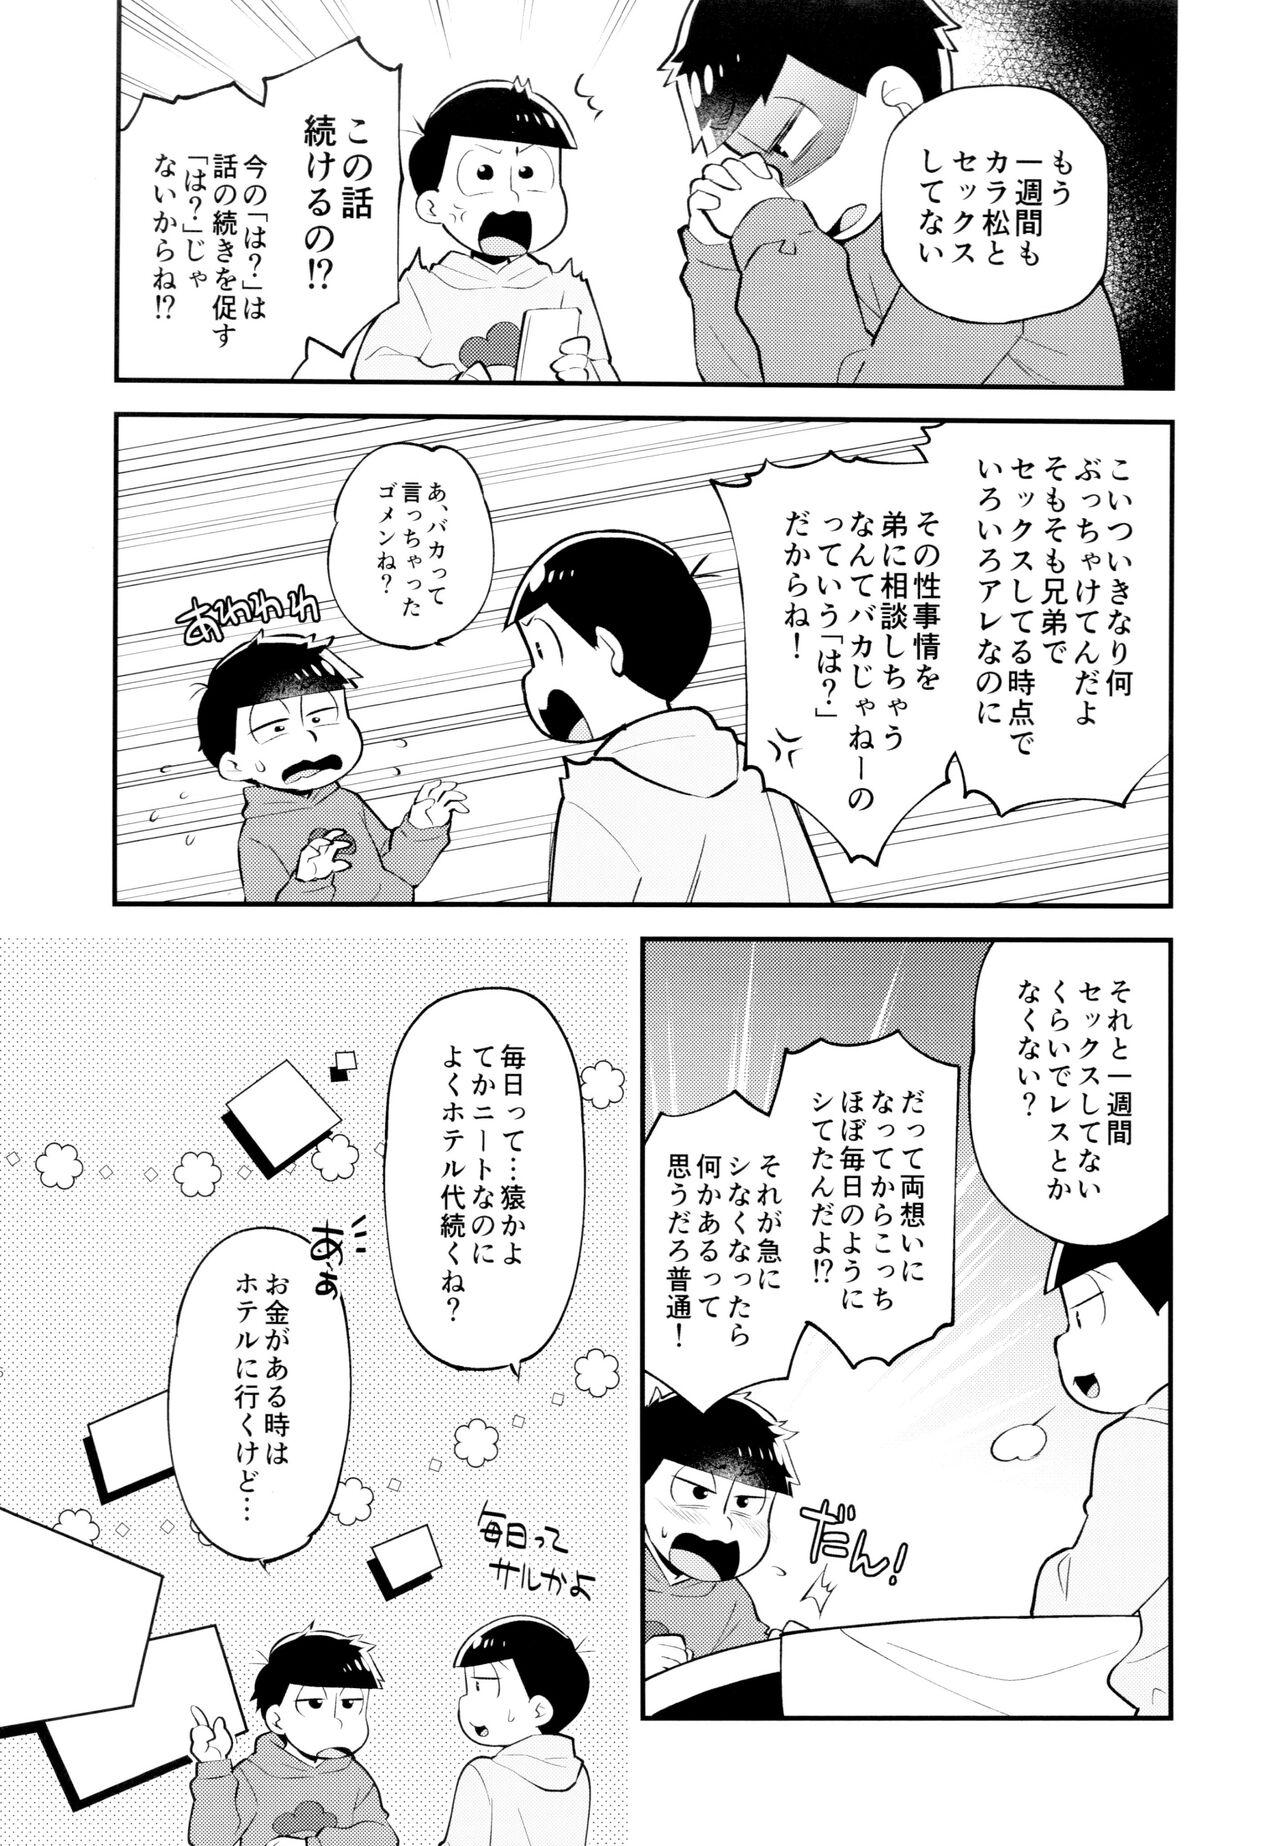 Chica Our Six-Day Sexual War - Osomatsu-san Hoe - Page 5